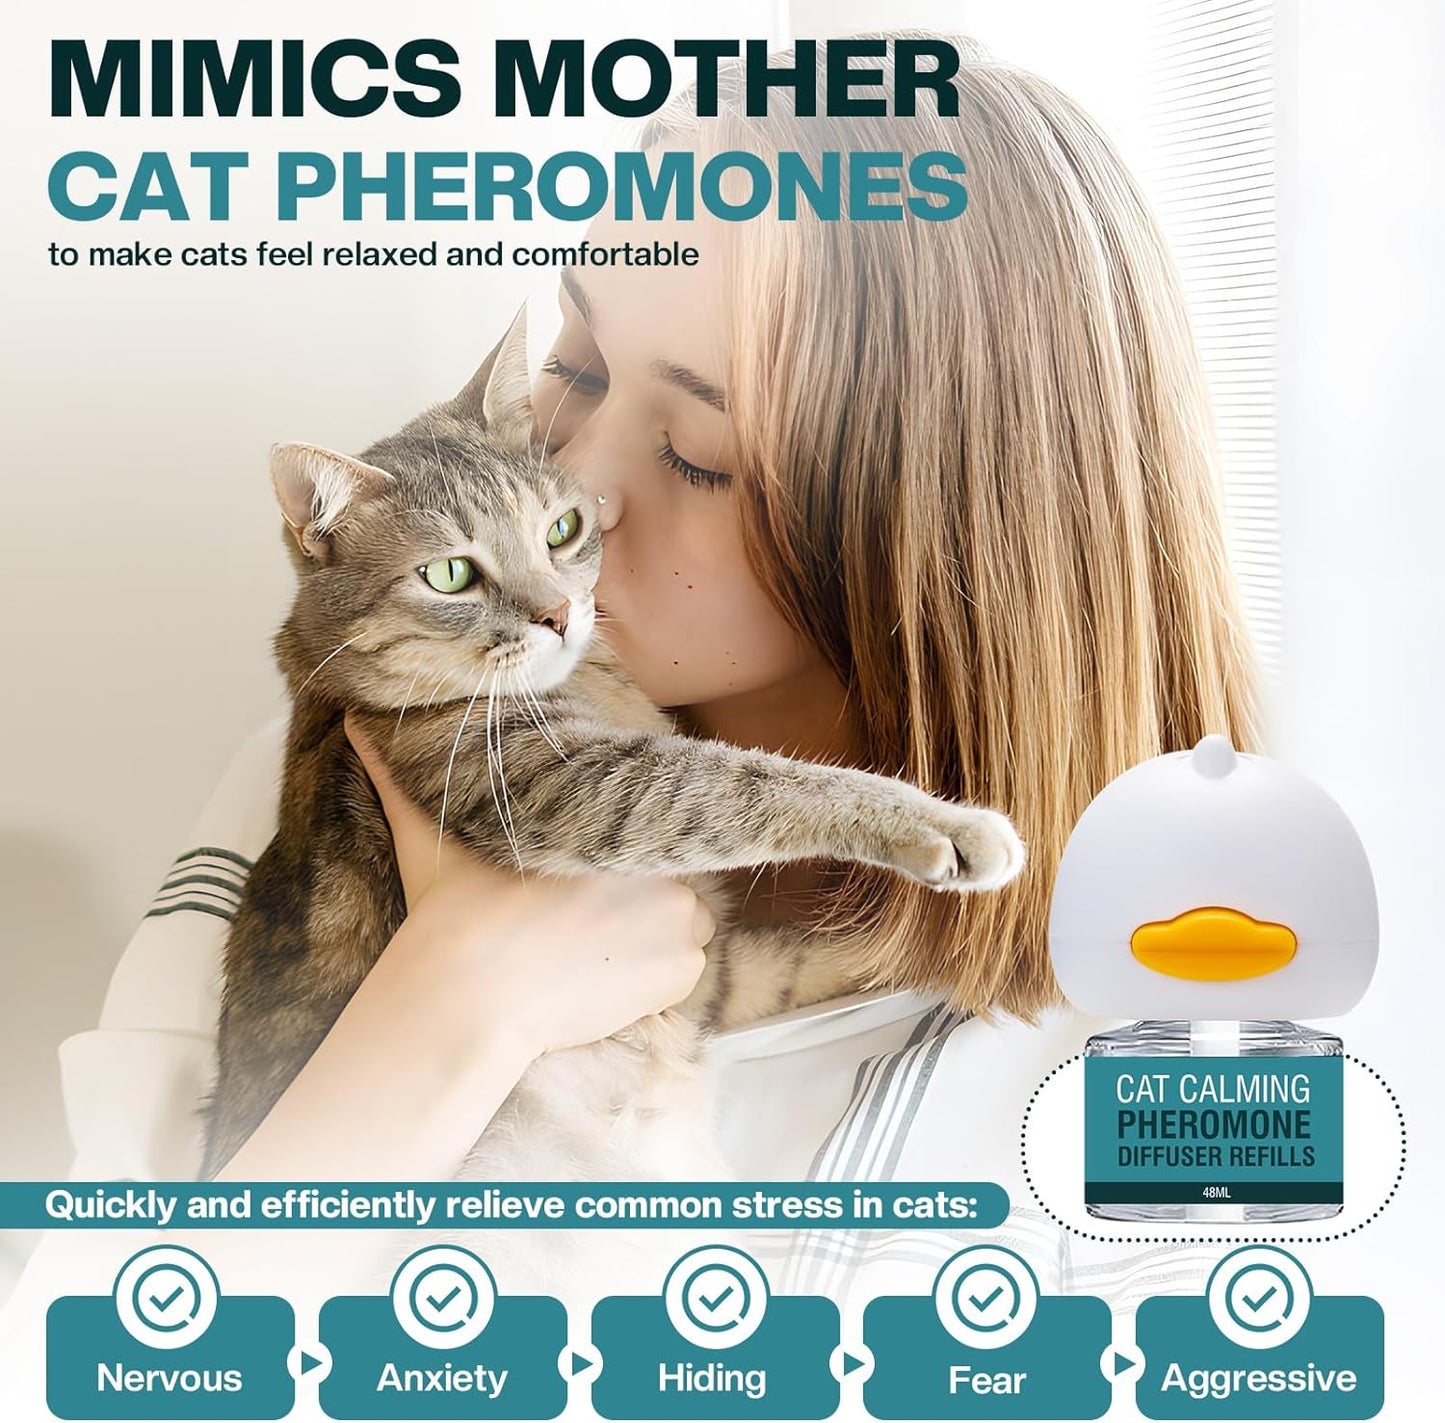 Cat Calming Diffuser 4 in 1 Multicat Calming Pheromones Diffusers Relief Stress Anxiety Fighting Scratching 60 Days Calm Relaxing Pheromone for Cats kit 48ml Refill Fits All Common Diffuser Plug In